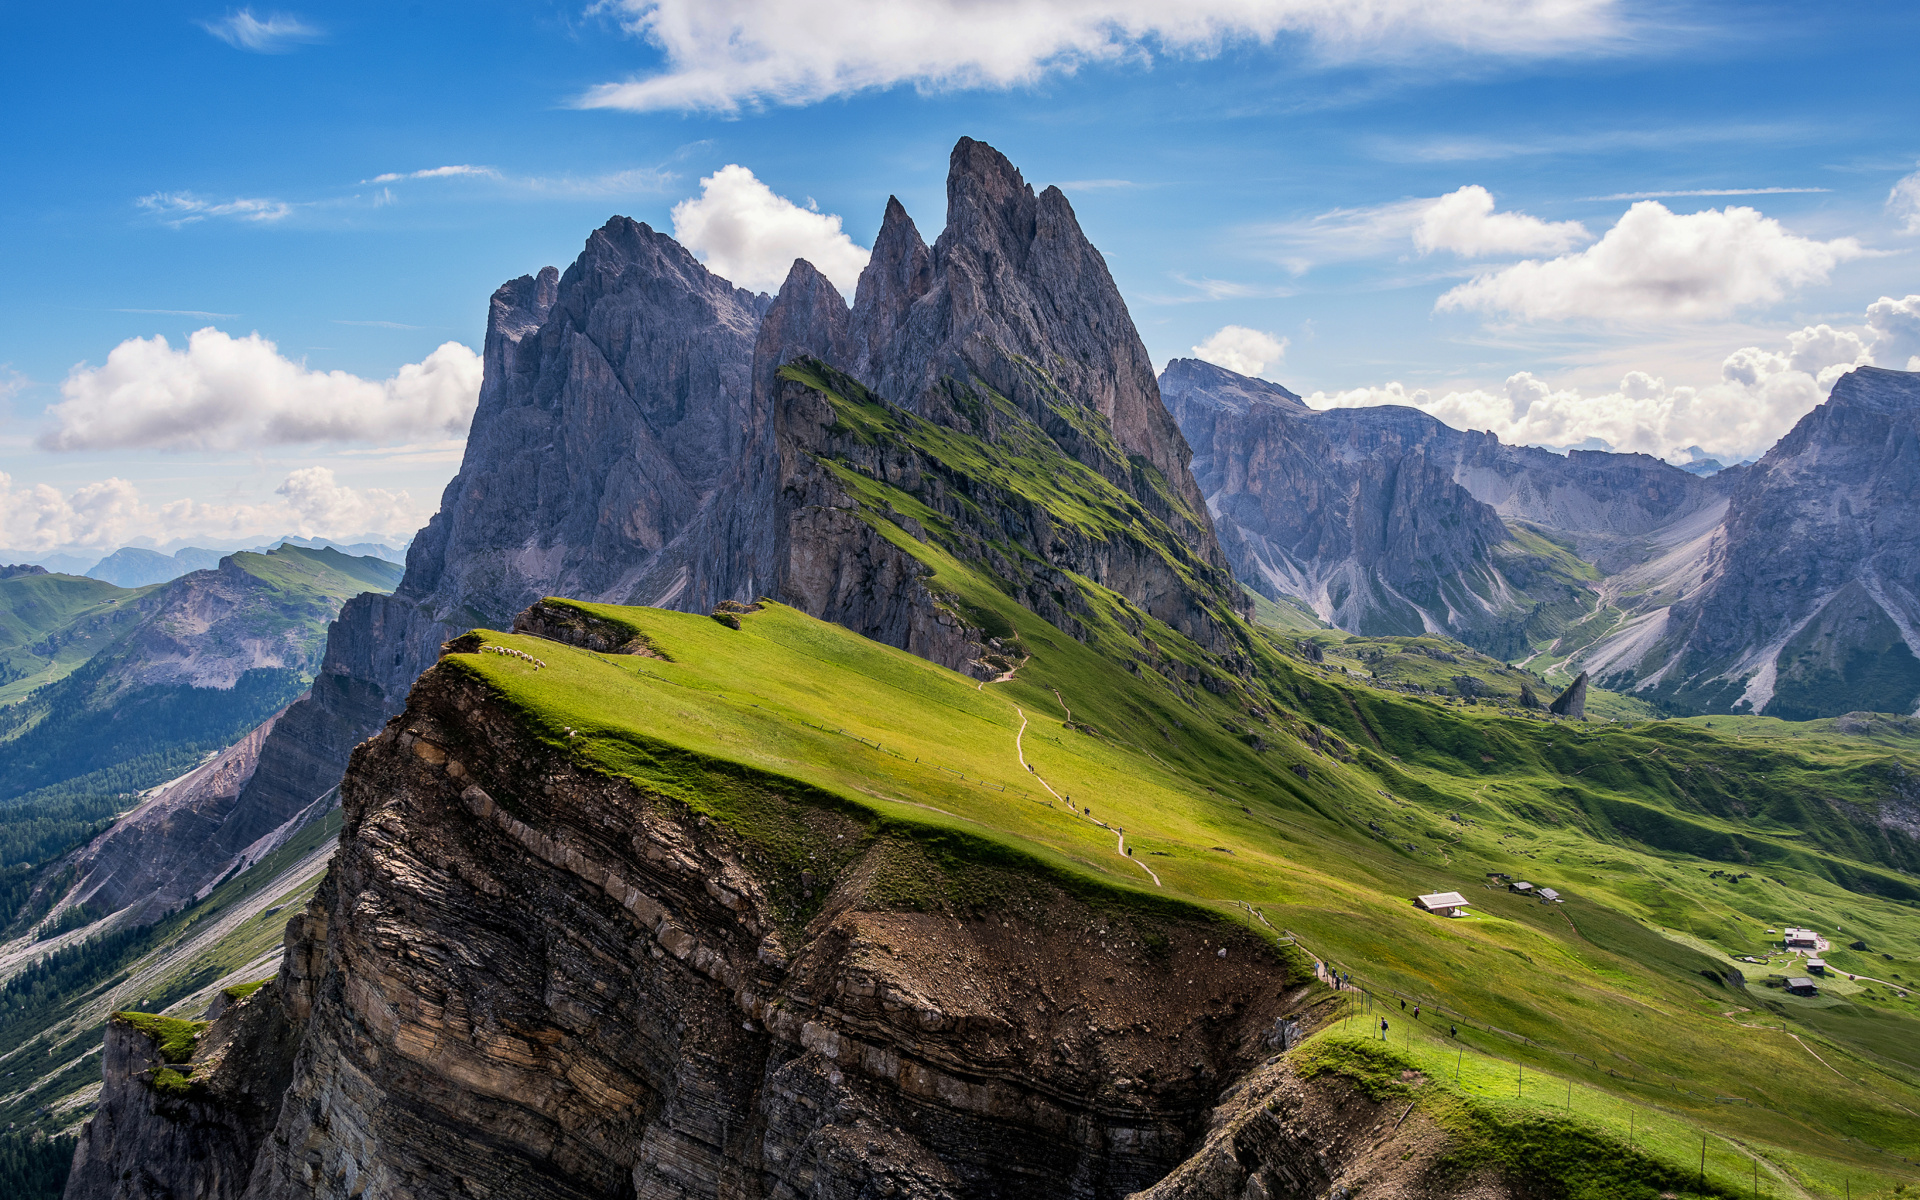 Sfondi Parco Naturale Puez Odle Dolomites South Tyrol in Italy 1920x1200